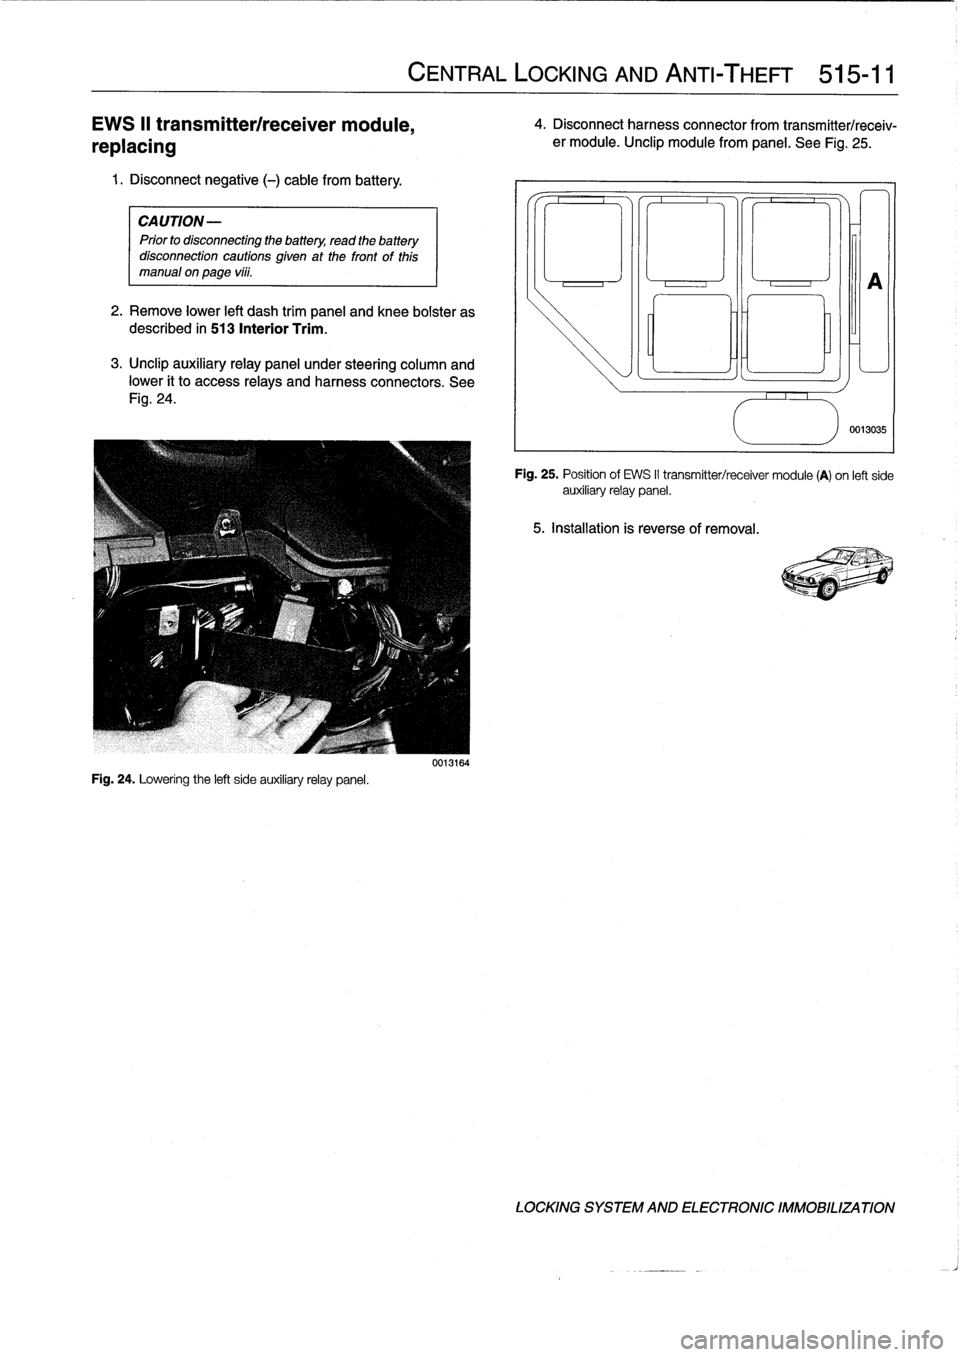 BMW 318i 1998 E36 Workshop Manual 
EWS
II
transmitterlreceiver
module,

replacing

1
.
Disconnect
negative
(-)
cable
from
battery
.

CAUTION-

Prior
to
disconnectiog
the
battery,
read
the
battery
disconnection
cautions
given
at
the
fr